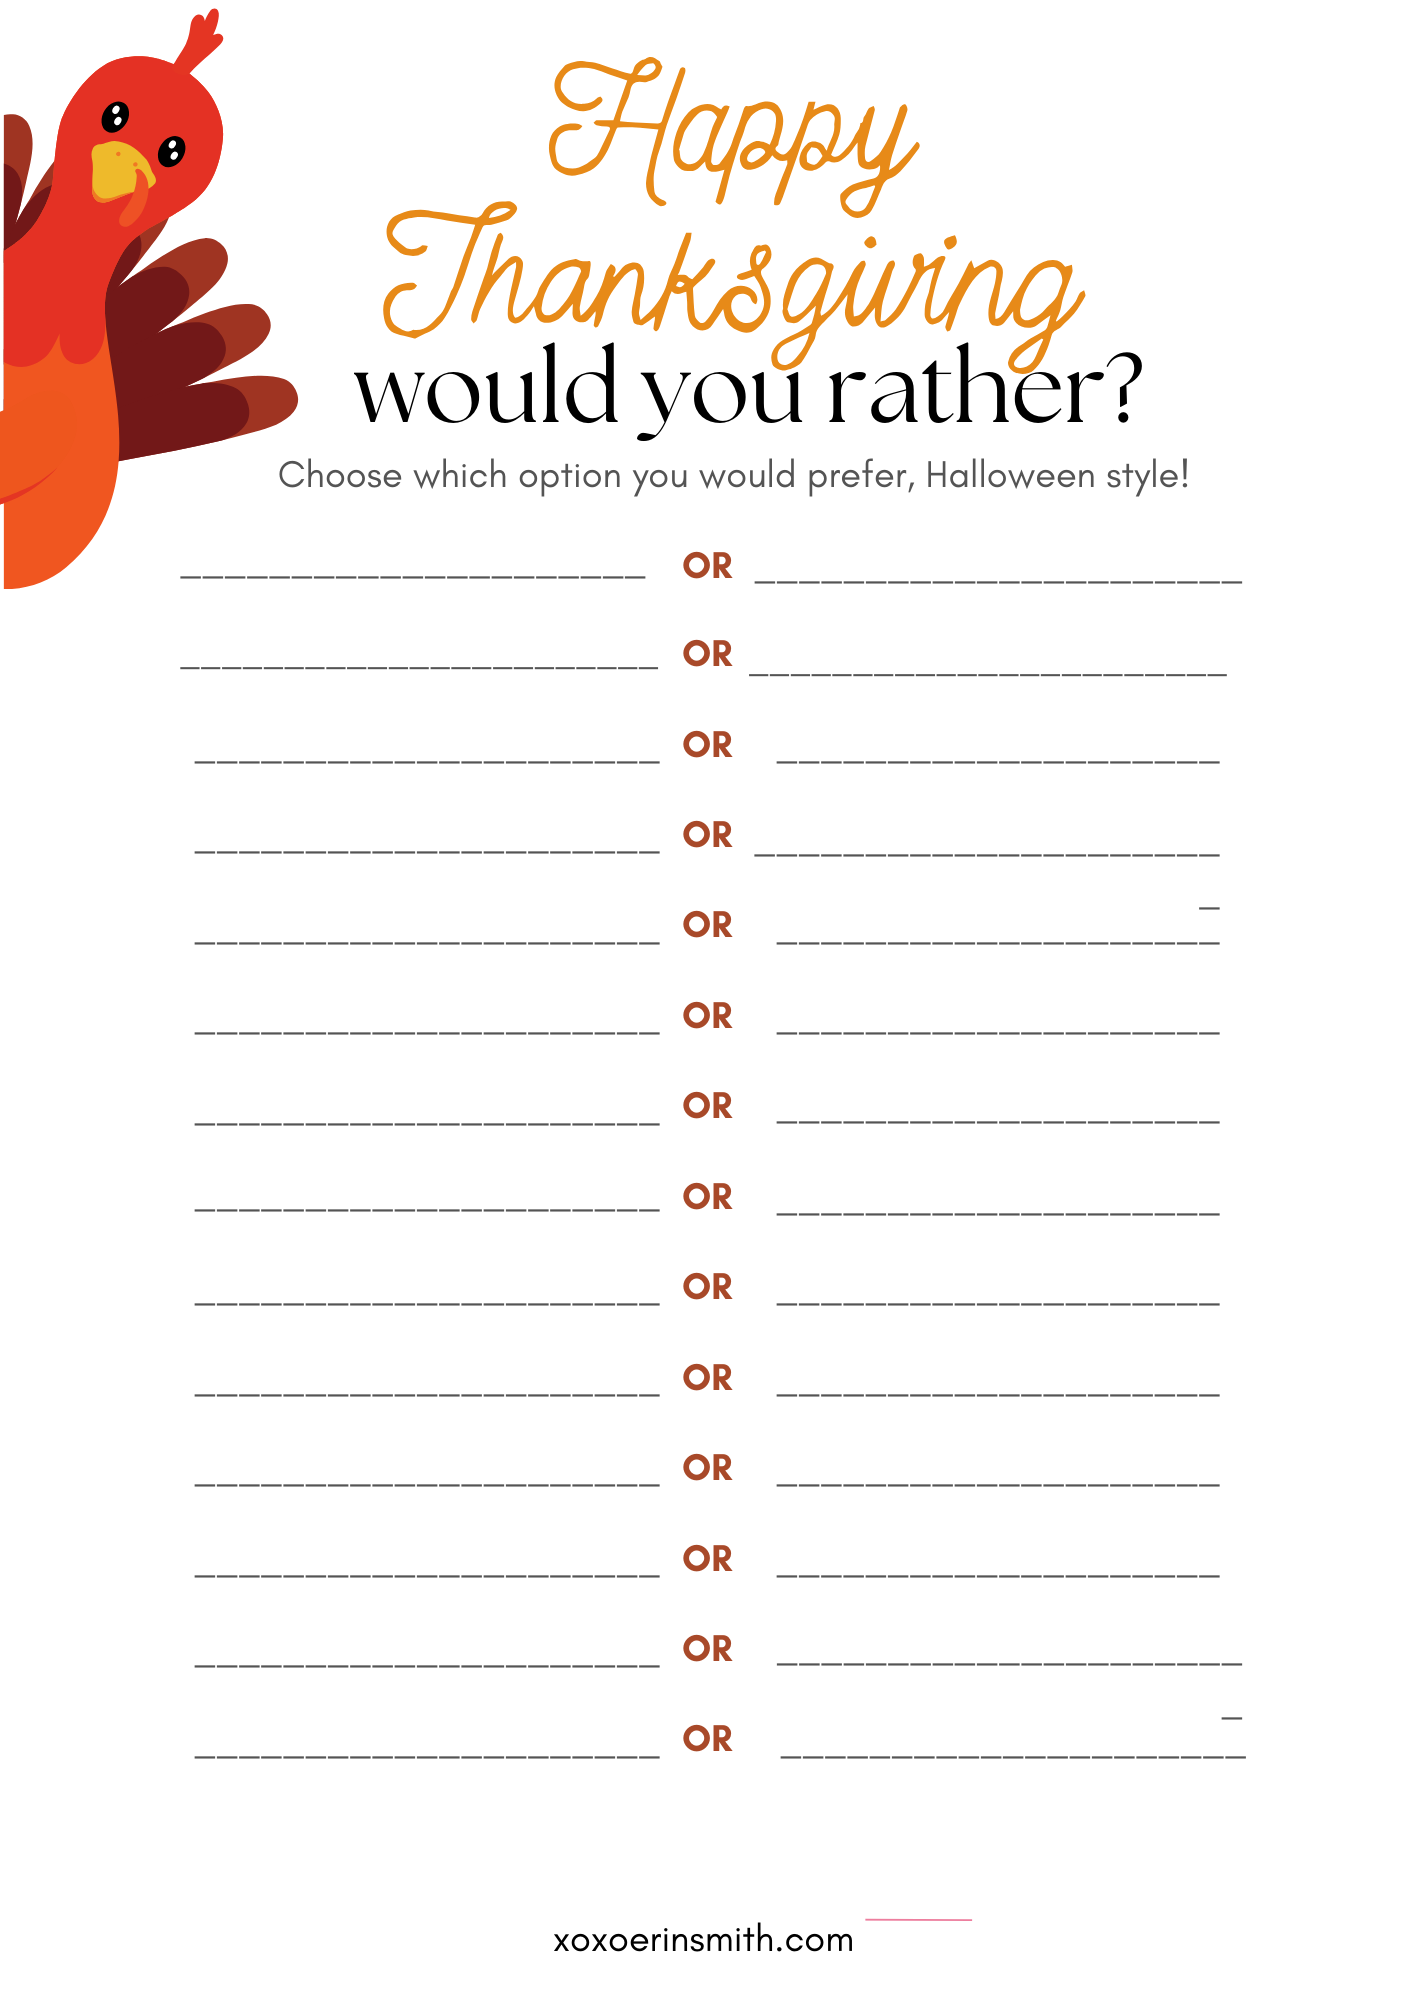 50 Winter Would You Rather (Free Printables) - The Best Ideas for Kids